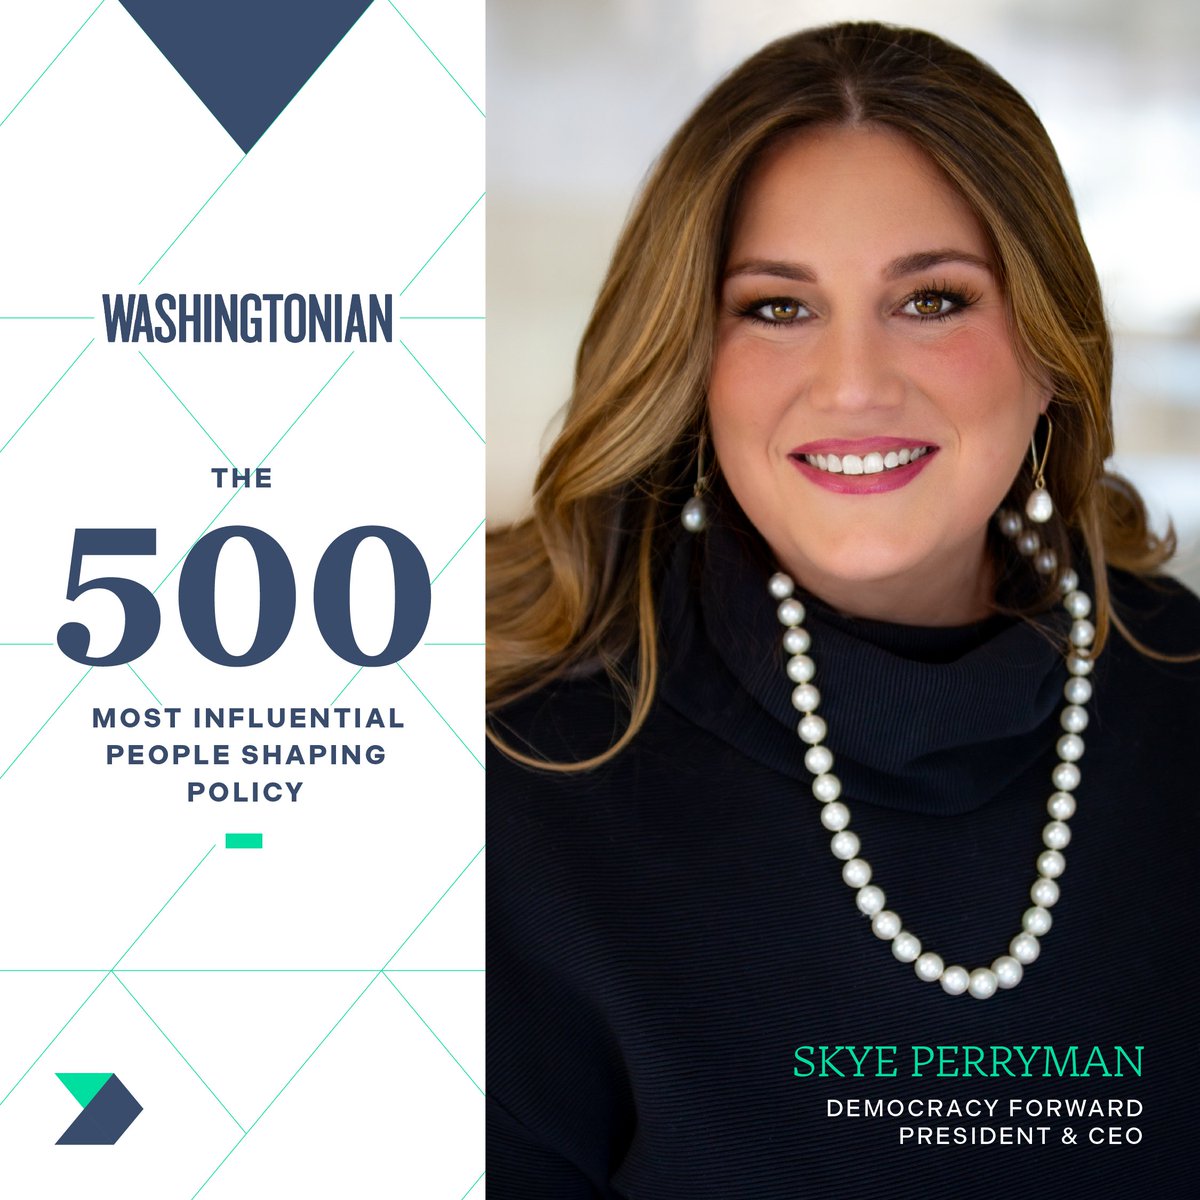 Congratulations to our President & CEO Skye Perryman who was included on @Washingtonian’s list of 500 Most Influential People Shaping Policy. Learn more about Skye and her transformative leadership in service to a bold, vibrant democracy for all people: democracyforward.org/updates/democr…